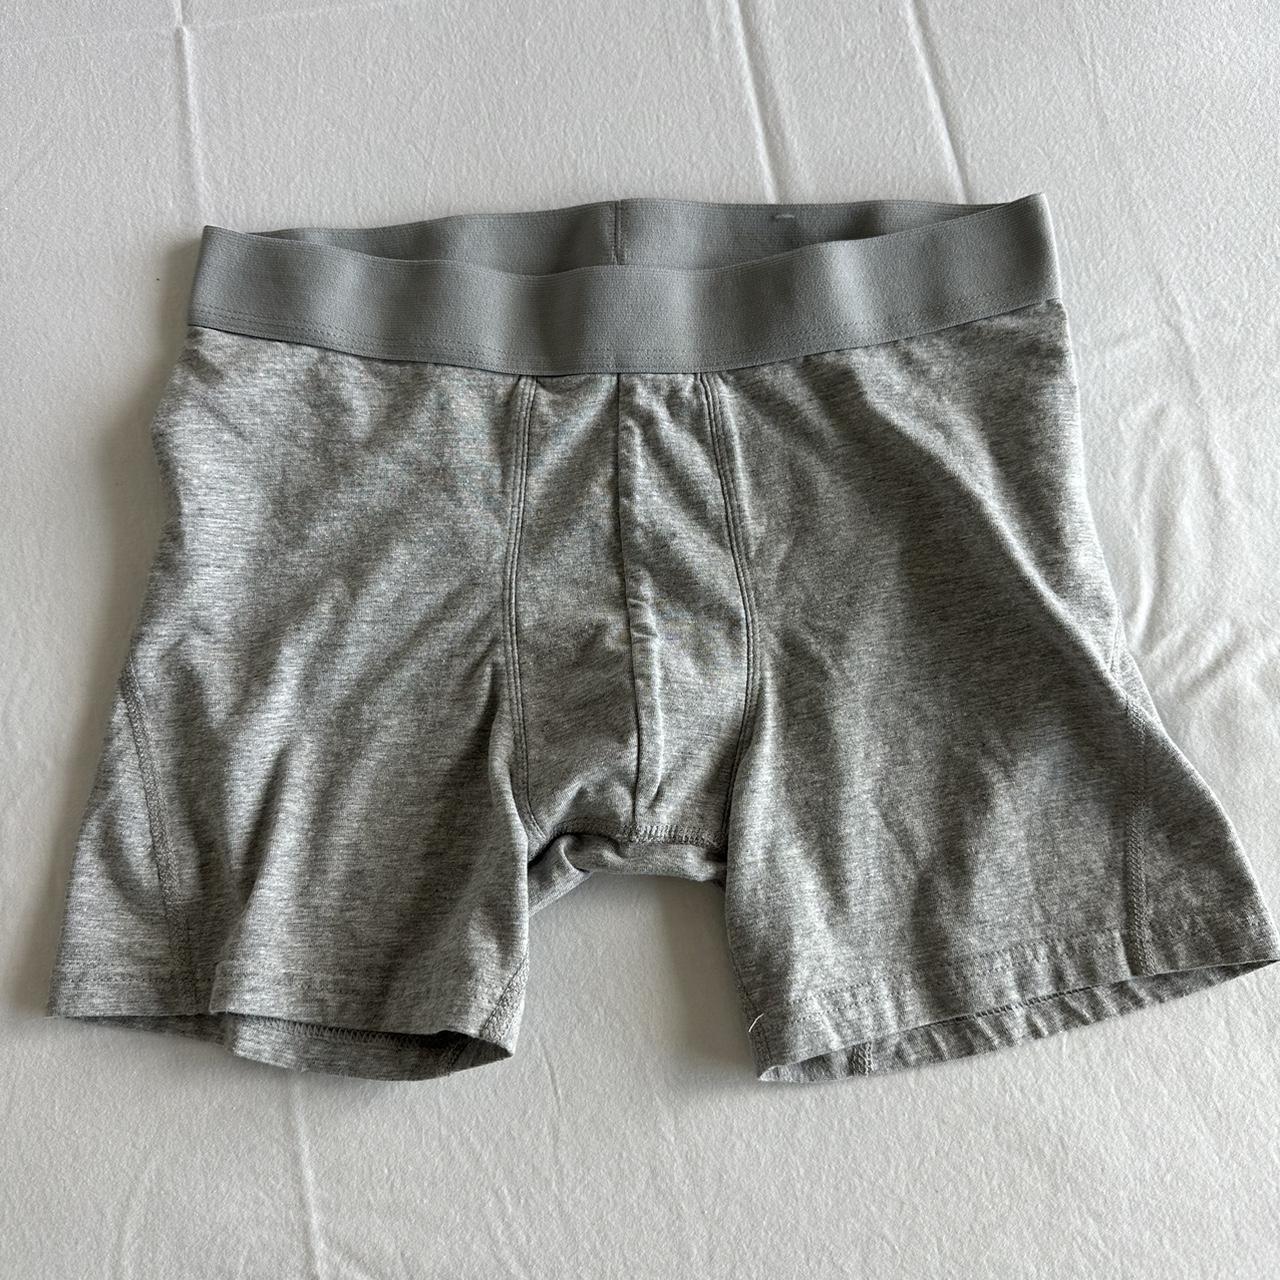 H&M Men's Black and Grey Boxers-and-briefs (4)